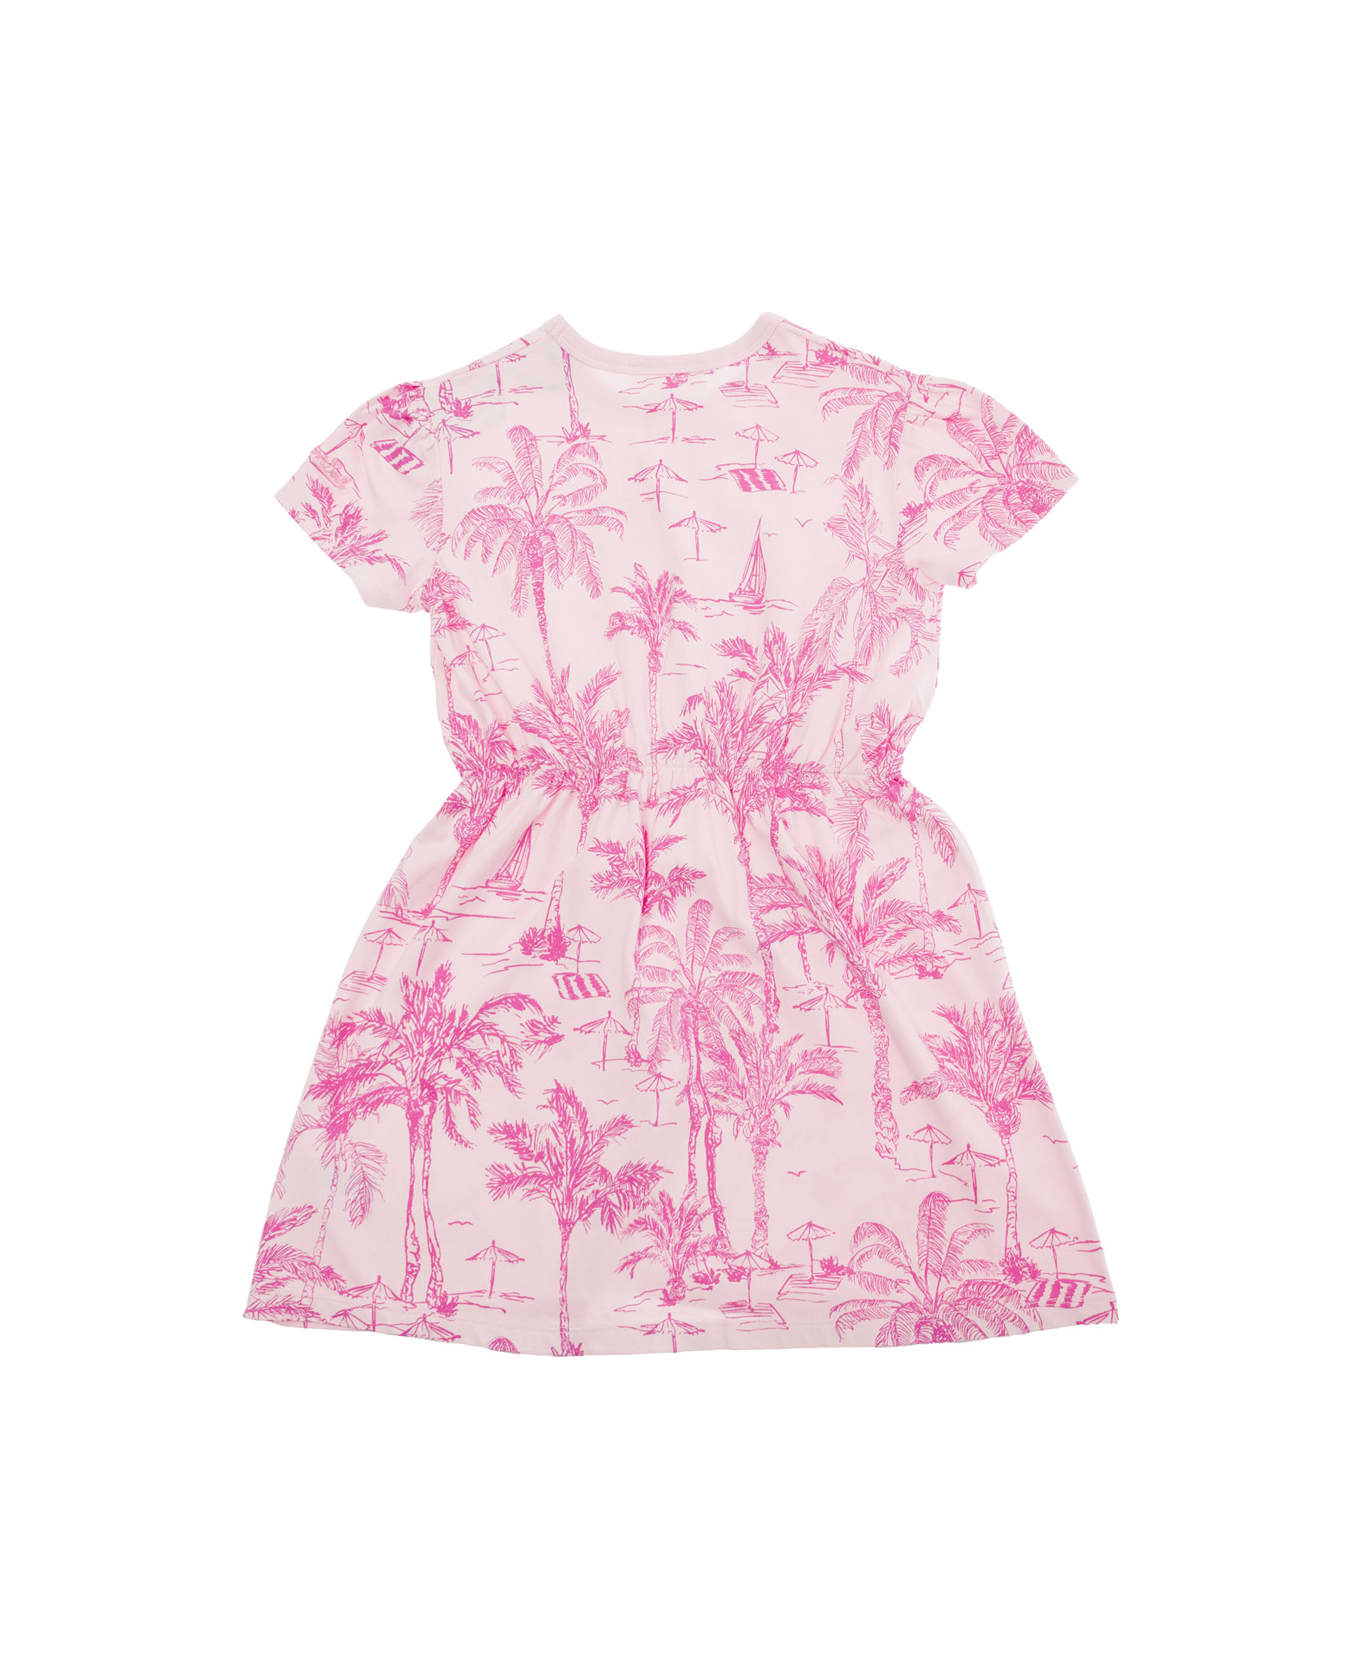 MC2 Saint Barth 'leila' Pink Dress With All-over Palm Print In Cotton Girl - Pink ワンピース＆ドレス